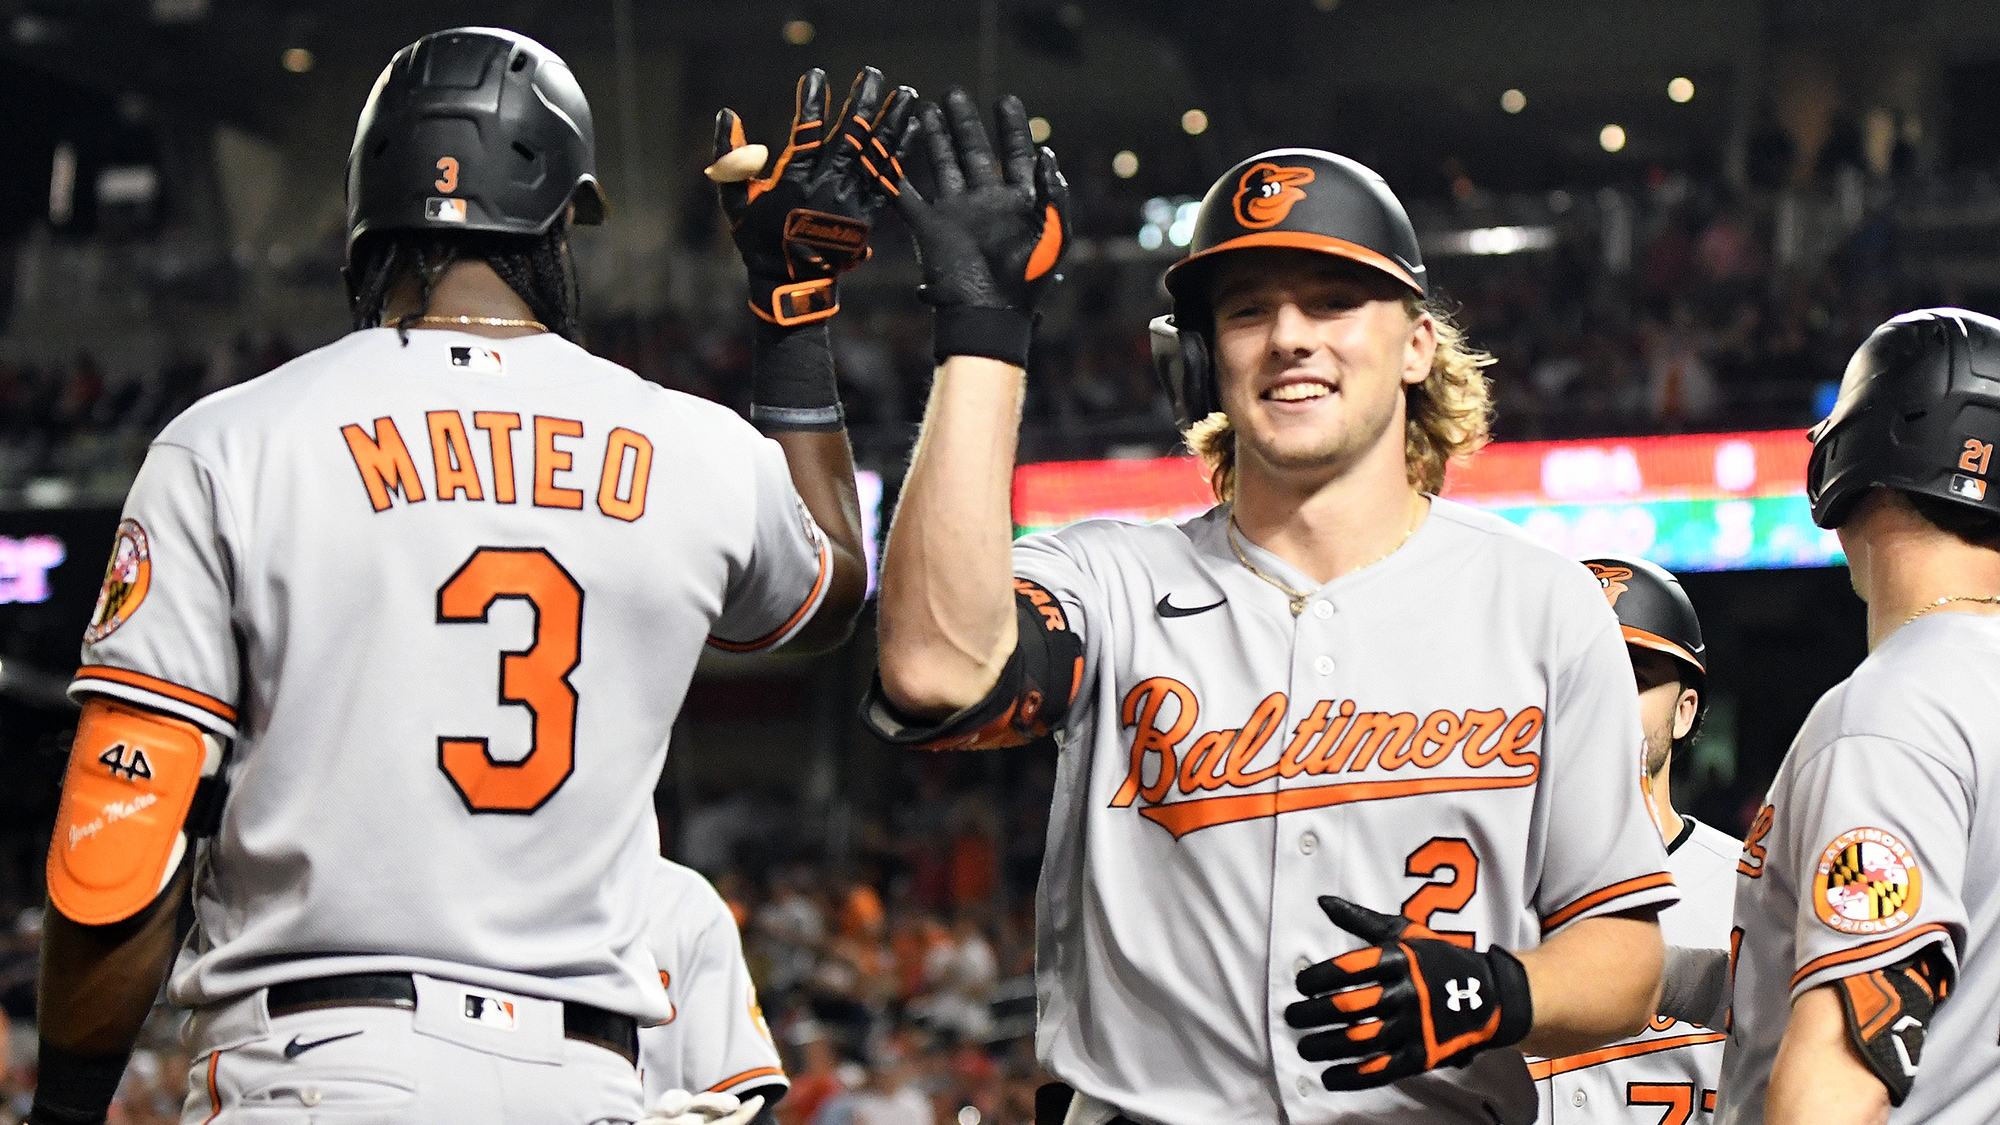 We're still waiting on the Orioles to join in contract extension